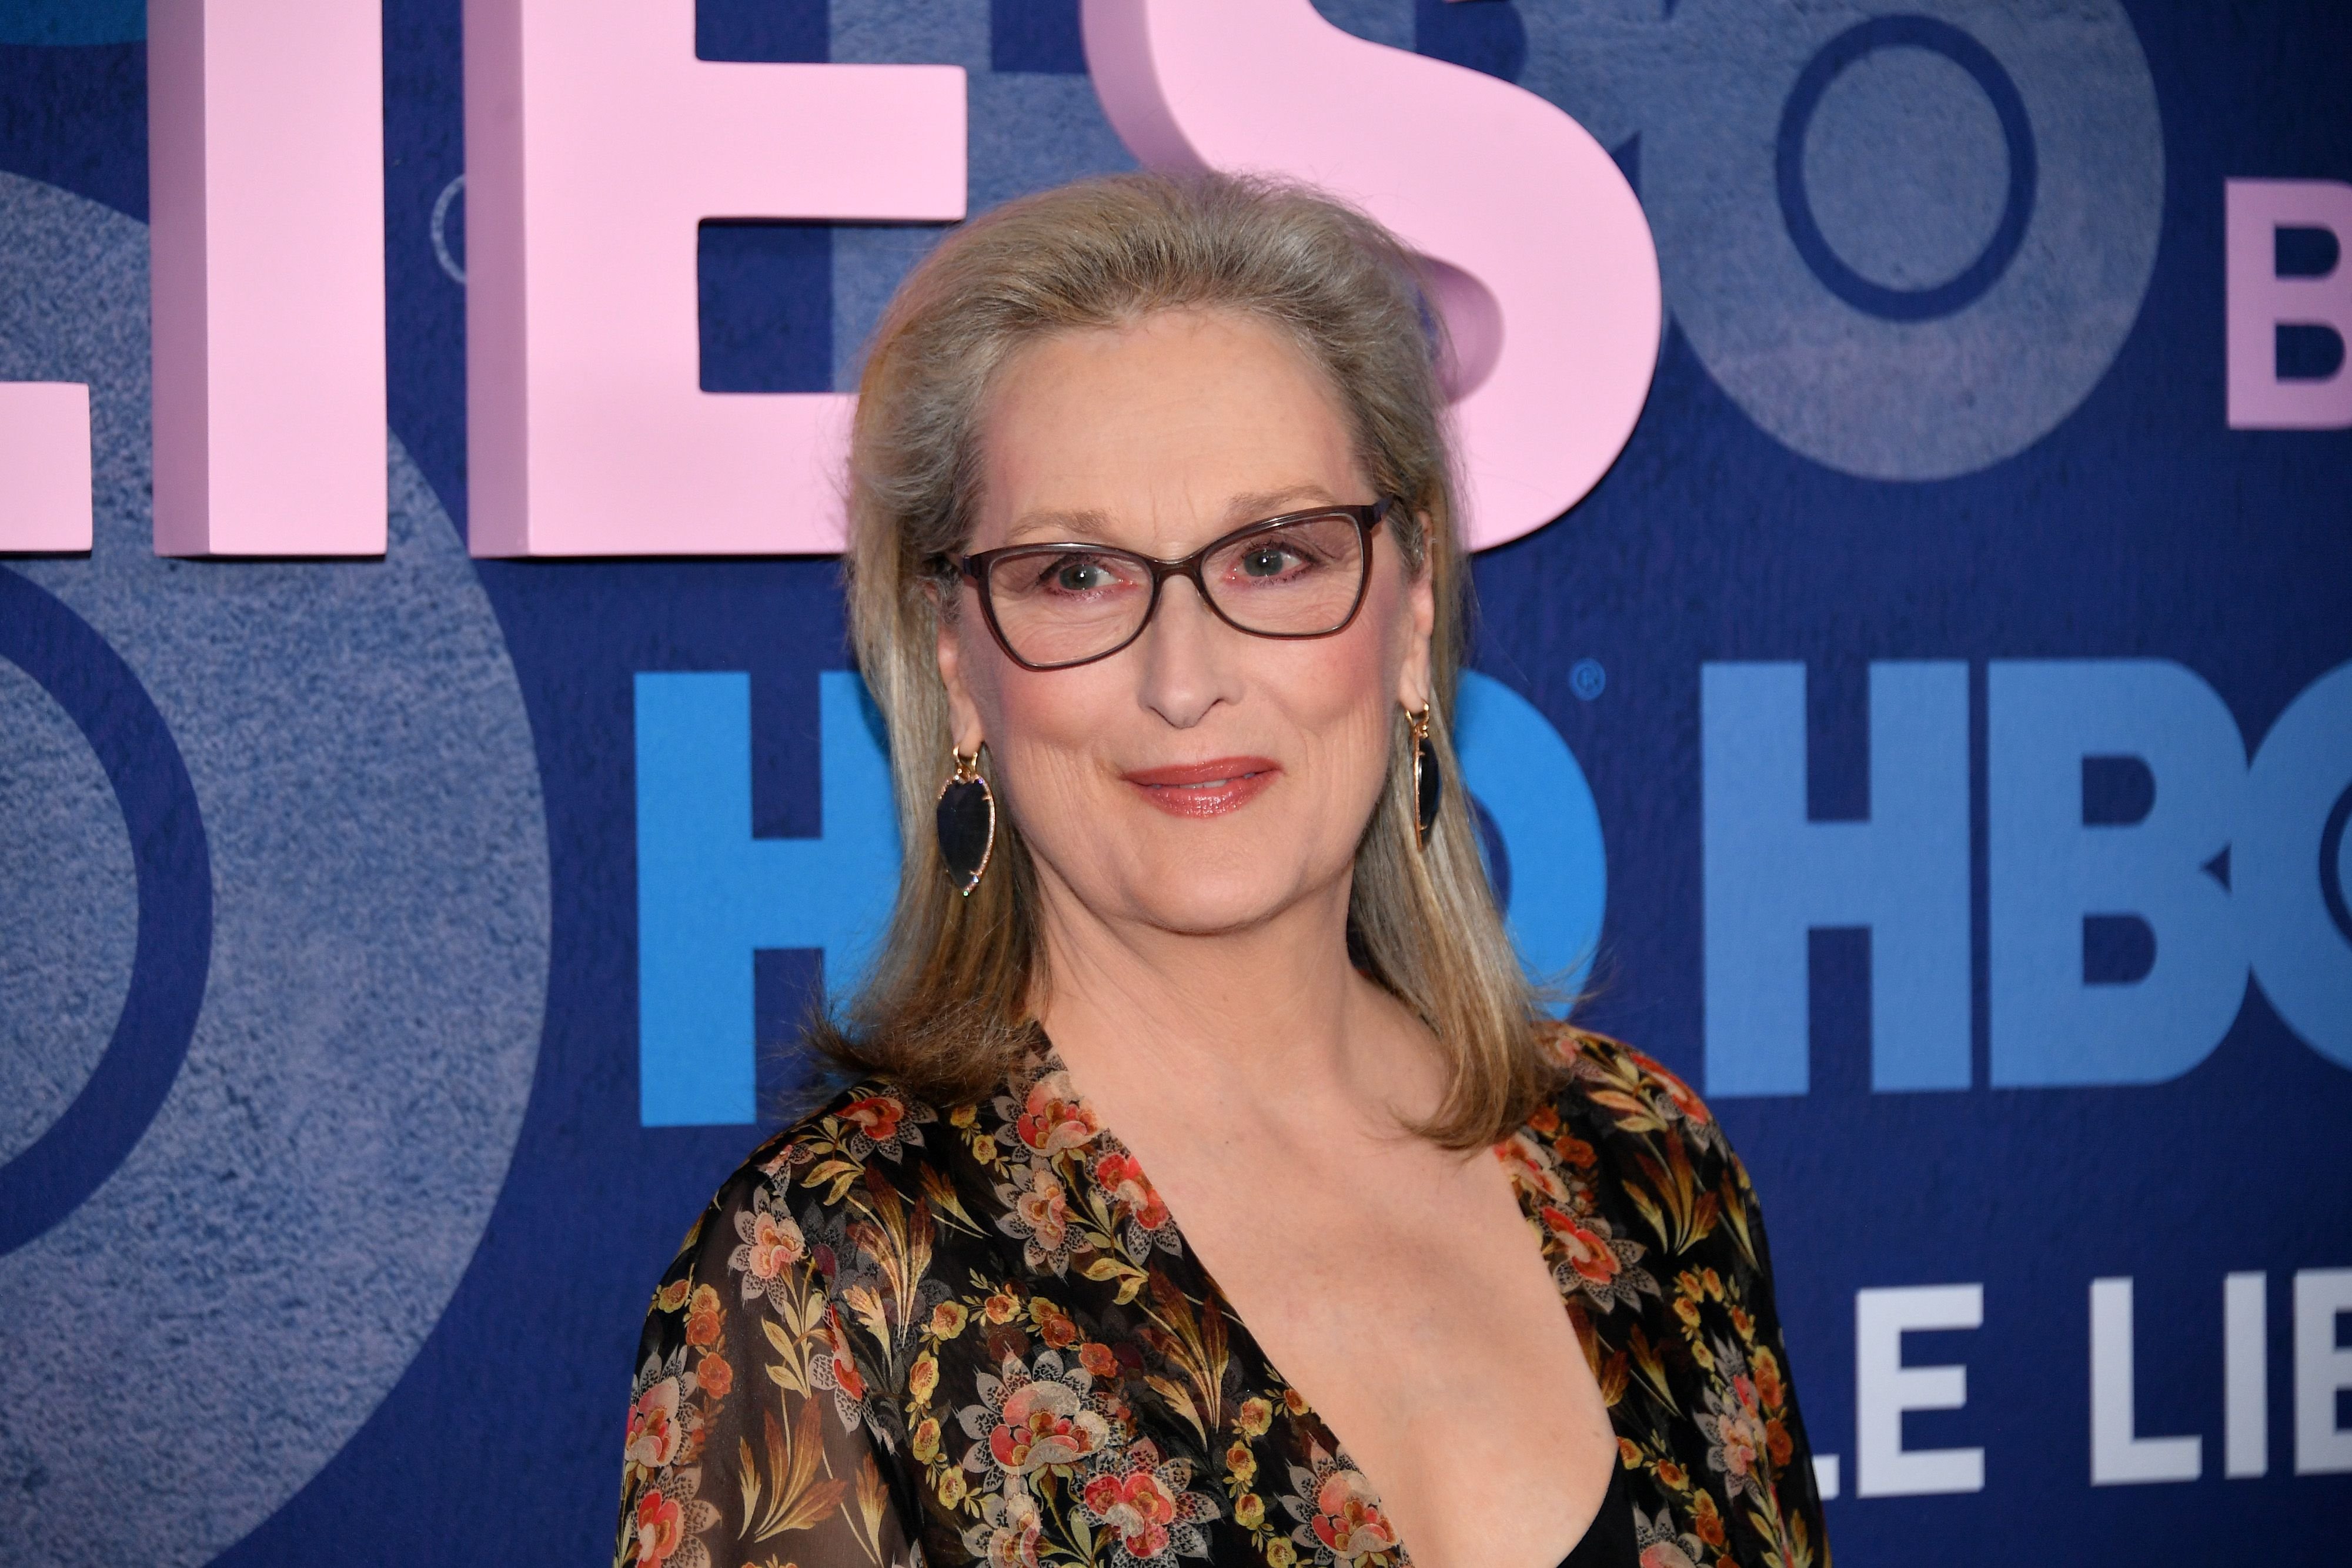 Meryl Streep at Jazz at Lincoln Center on May 29, 2019 | Photo: Getty Images